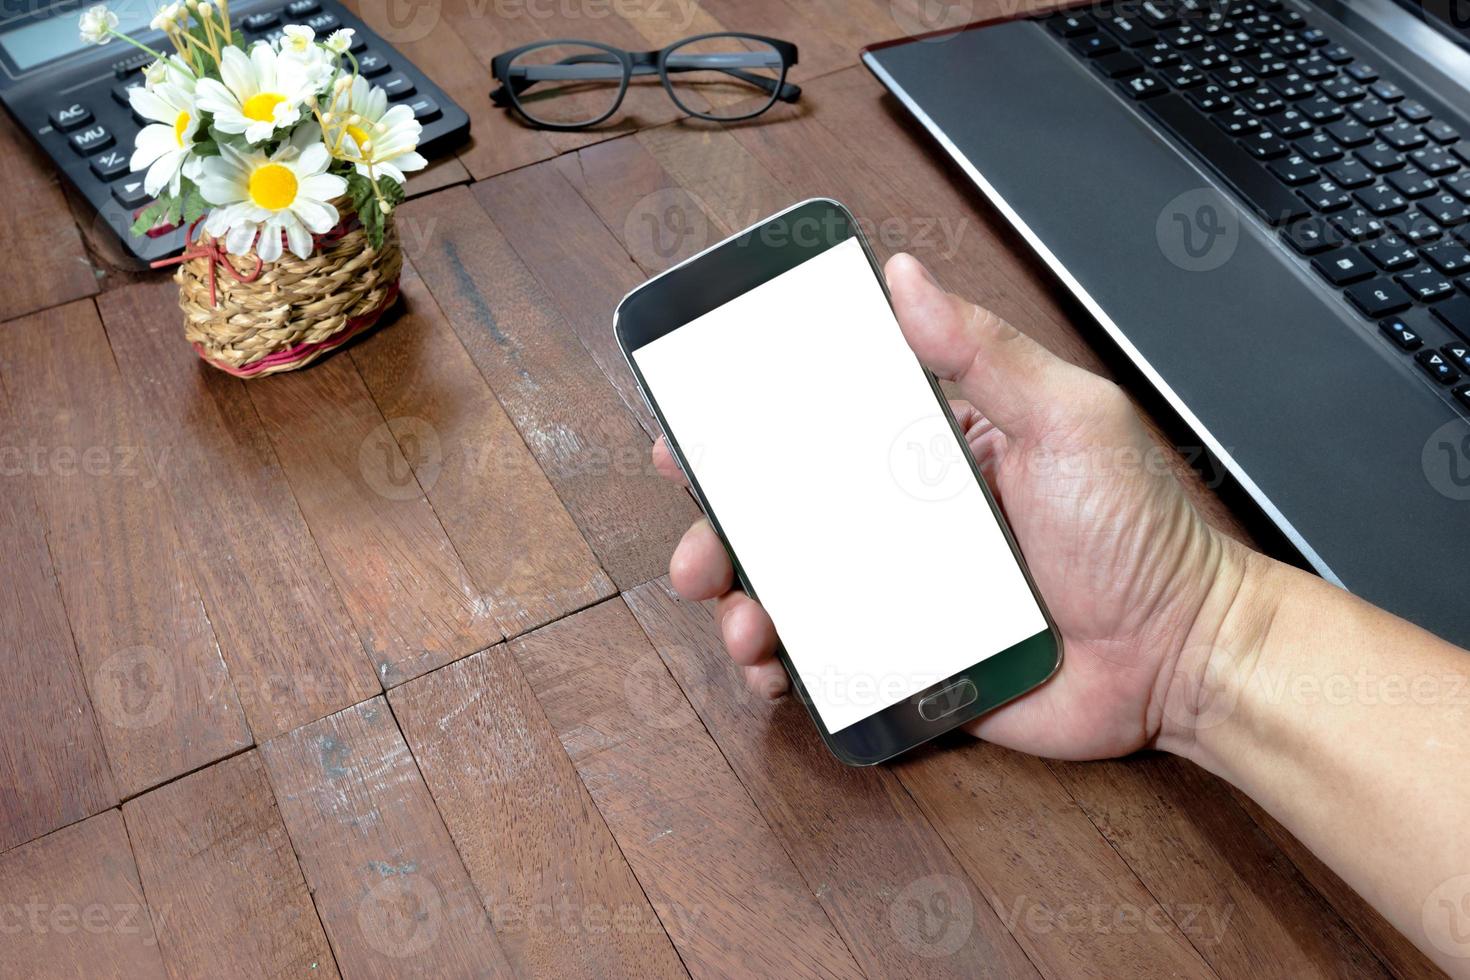 Human hand holding mobile smart phone and office equipment on desktop photo